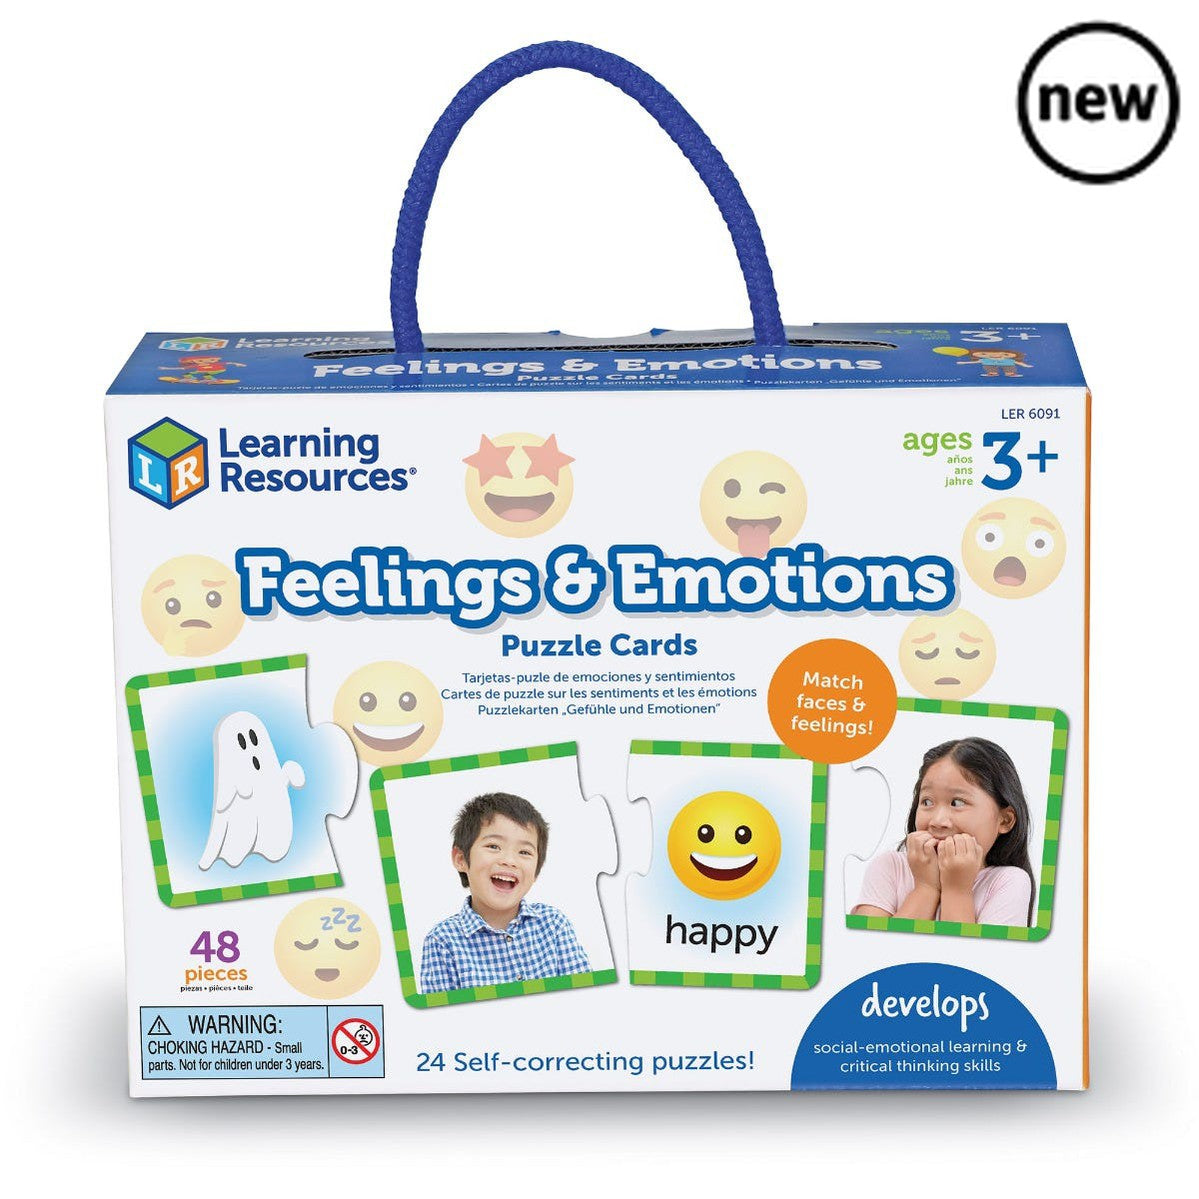 Feelings & Emotions Puzzle Cards, Help preschoolers build social emotional learning (SEL) skills with these colourful Feelings & Emotions Puzzle Cards. Each 2-piece puzzle shows a full colour photo of a real child making a facial expression on a piece, with a colourful corresponding emoji on the other piece. The puzzles are keyed differently, which means there’s only one correct solution. This allows children to self-correct and learn independently. Includes 24 puzzles in a reusable storage box with carry h